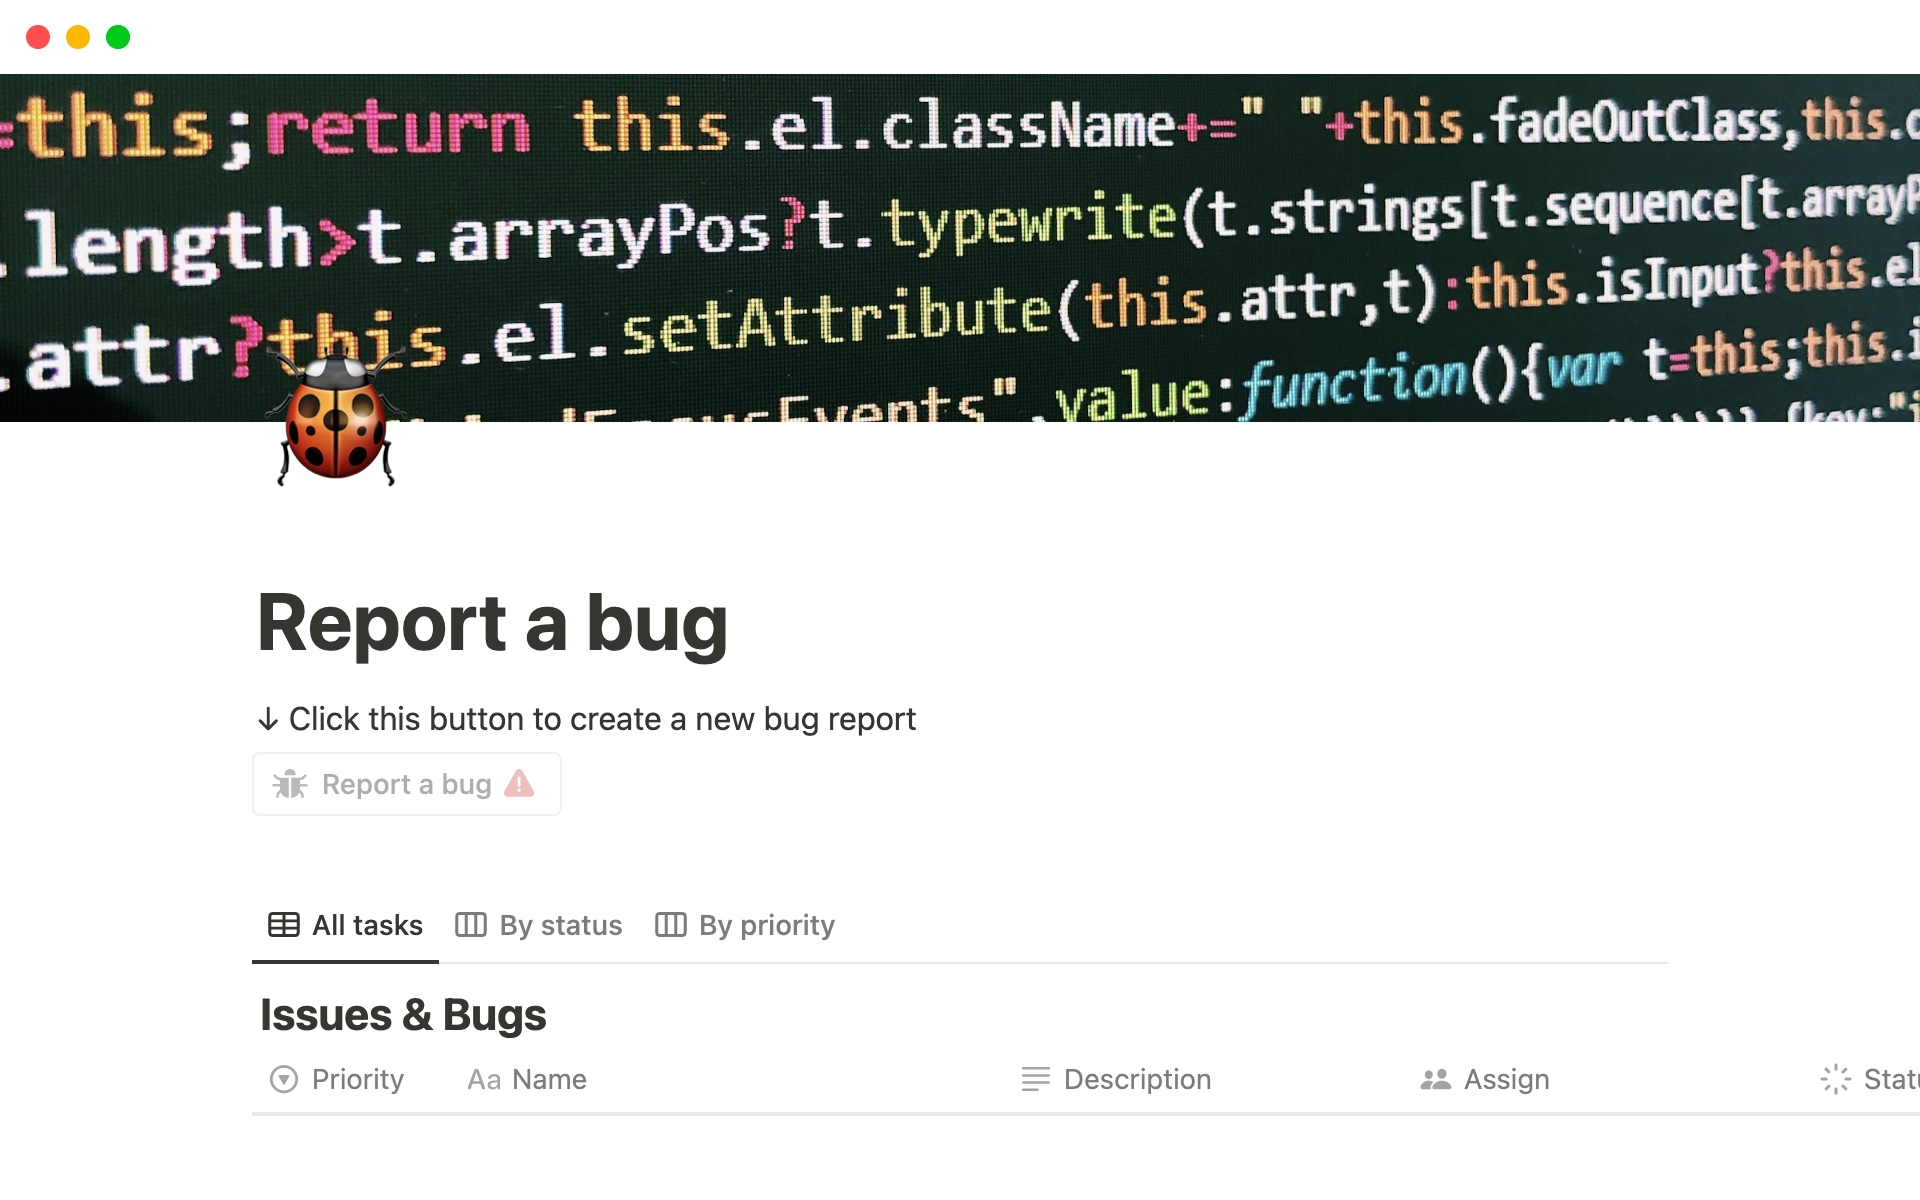 Easily report and track software bugs using Notion's button feature for efficient issue management.